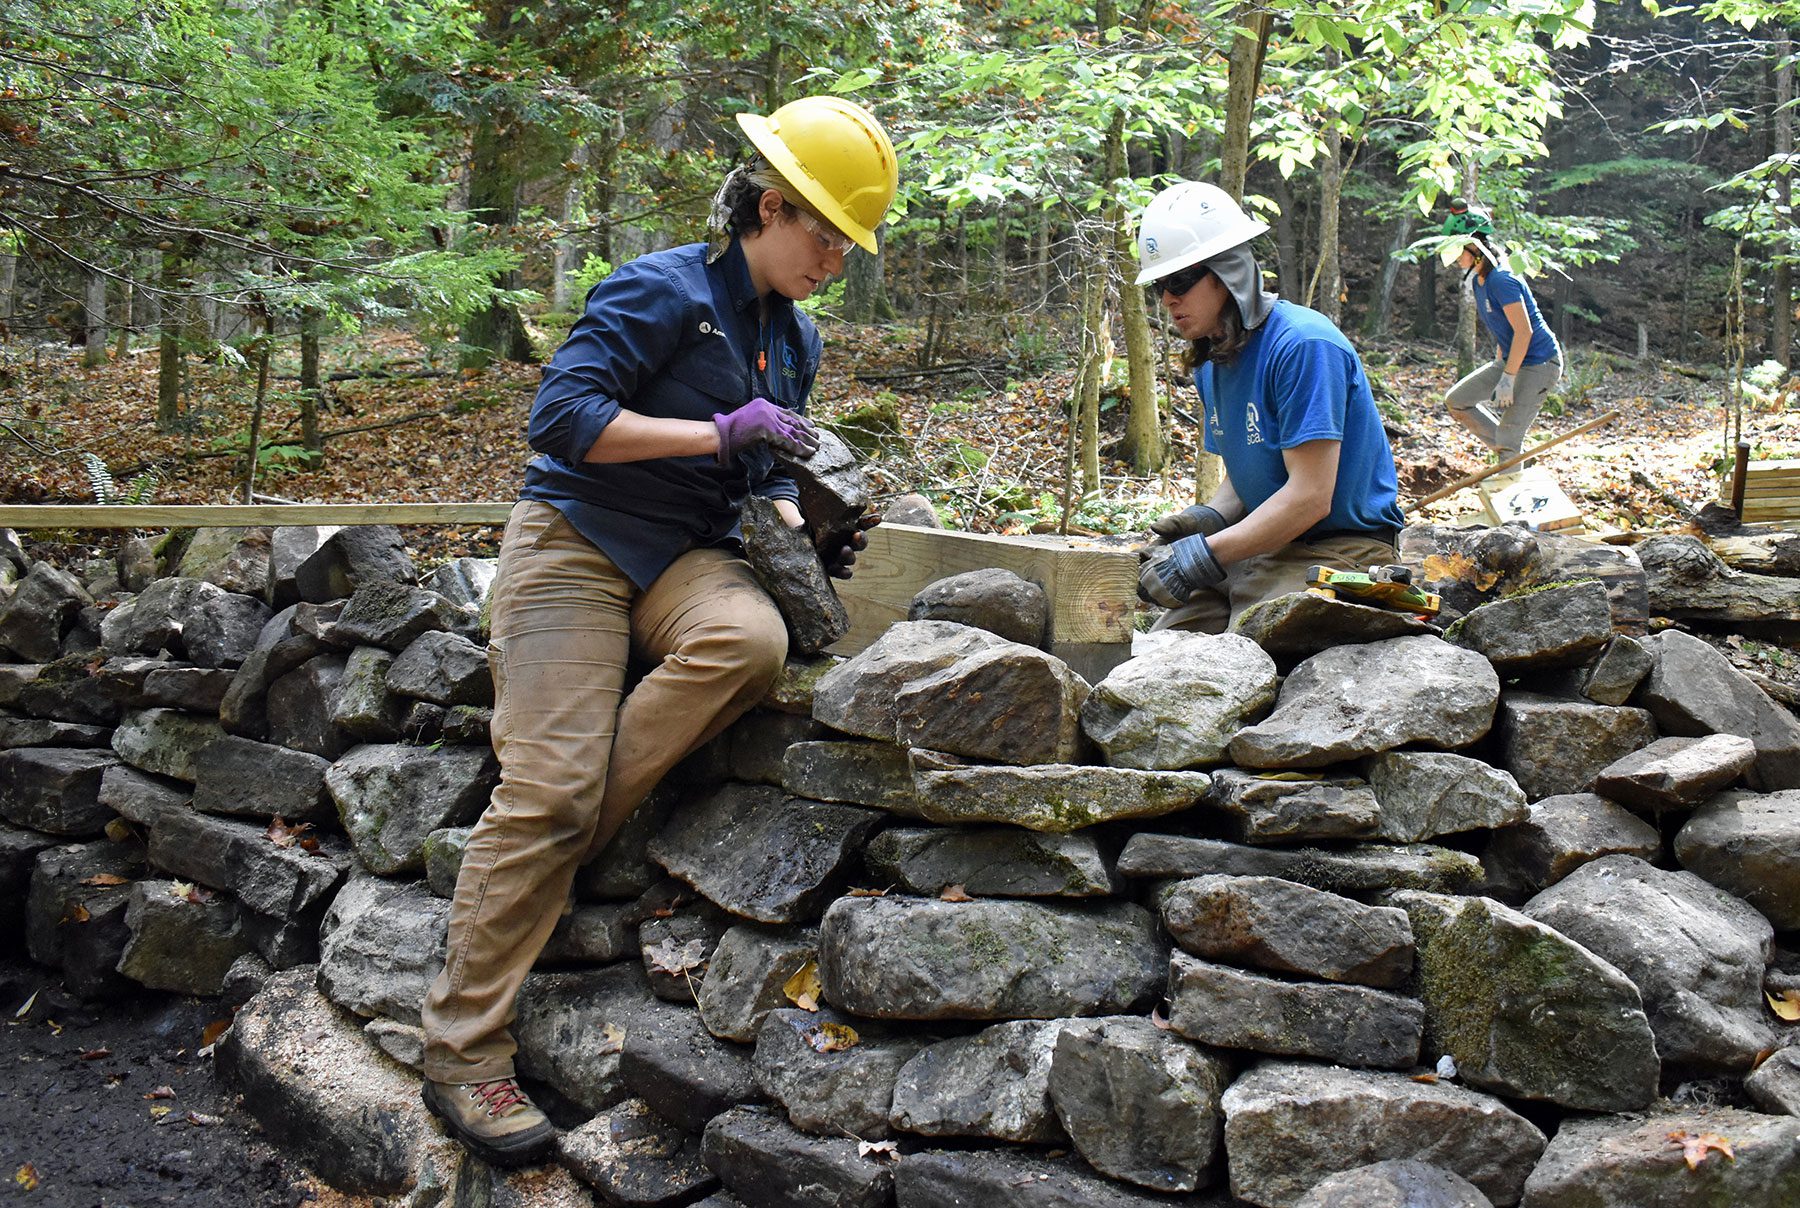 Two people wearing blue shirts and yellow hard hats are working on a stone wall